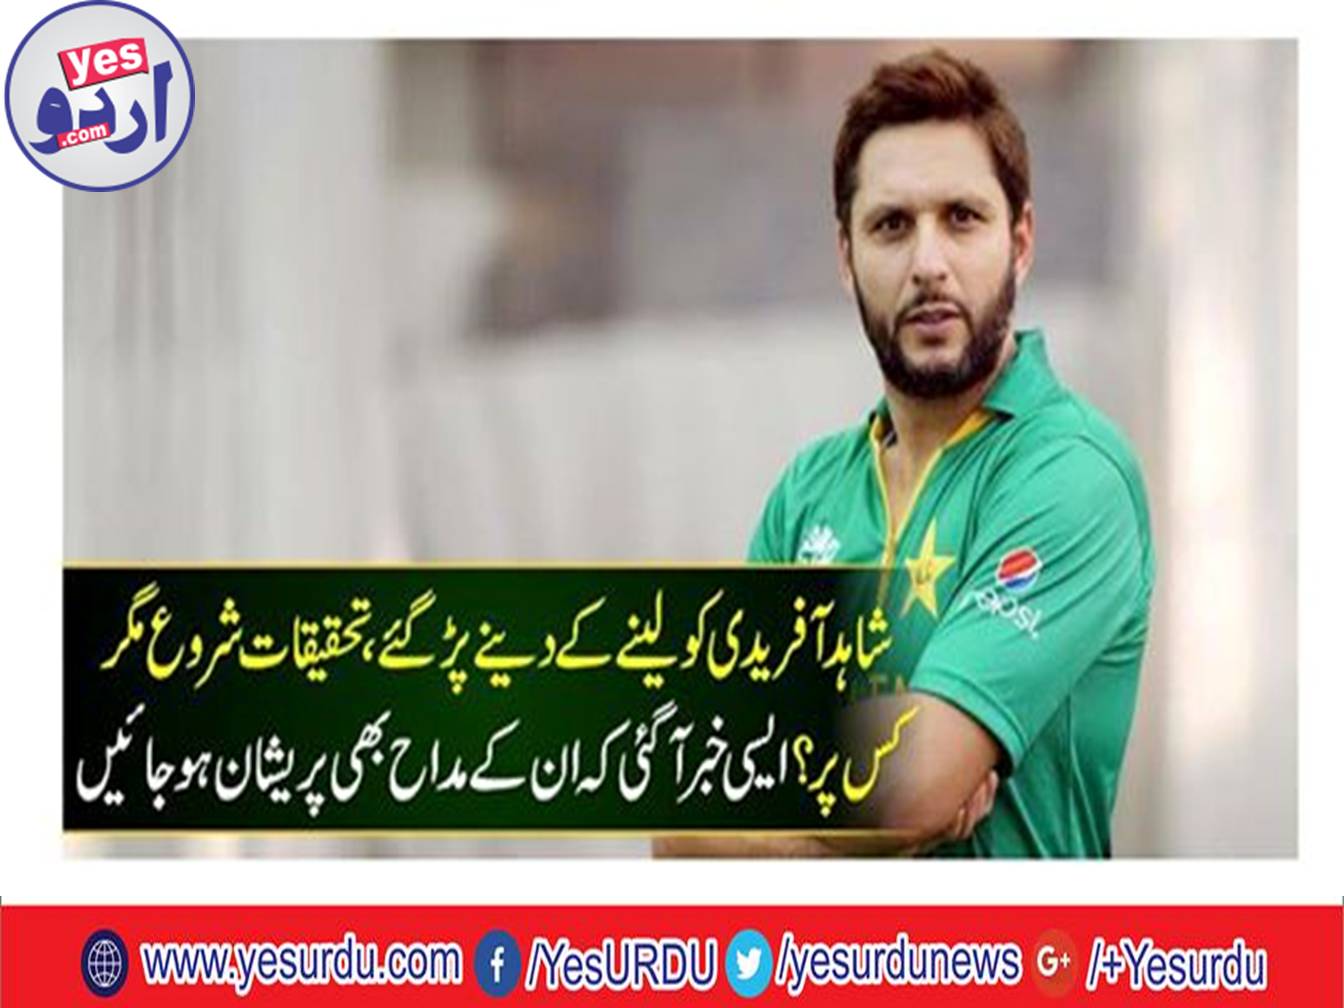 Wildlife Sindh Department ordered the investigation against Shahid Afridi taking notice of the presence of lion at home